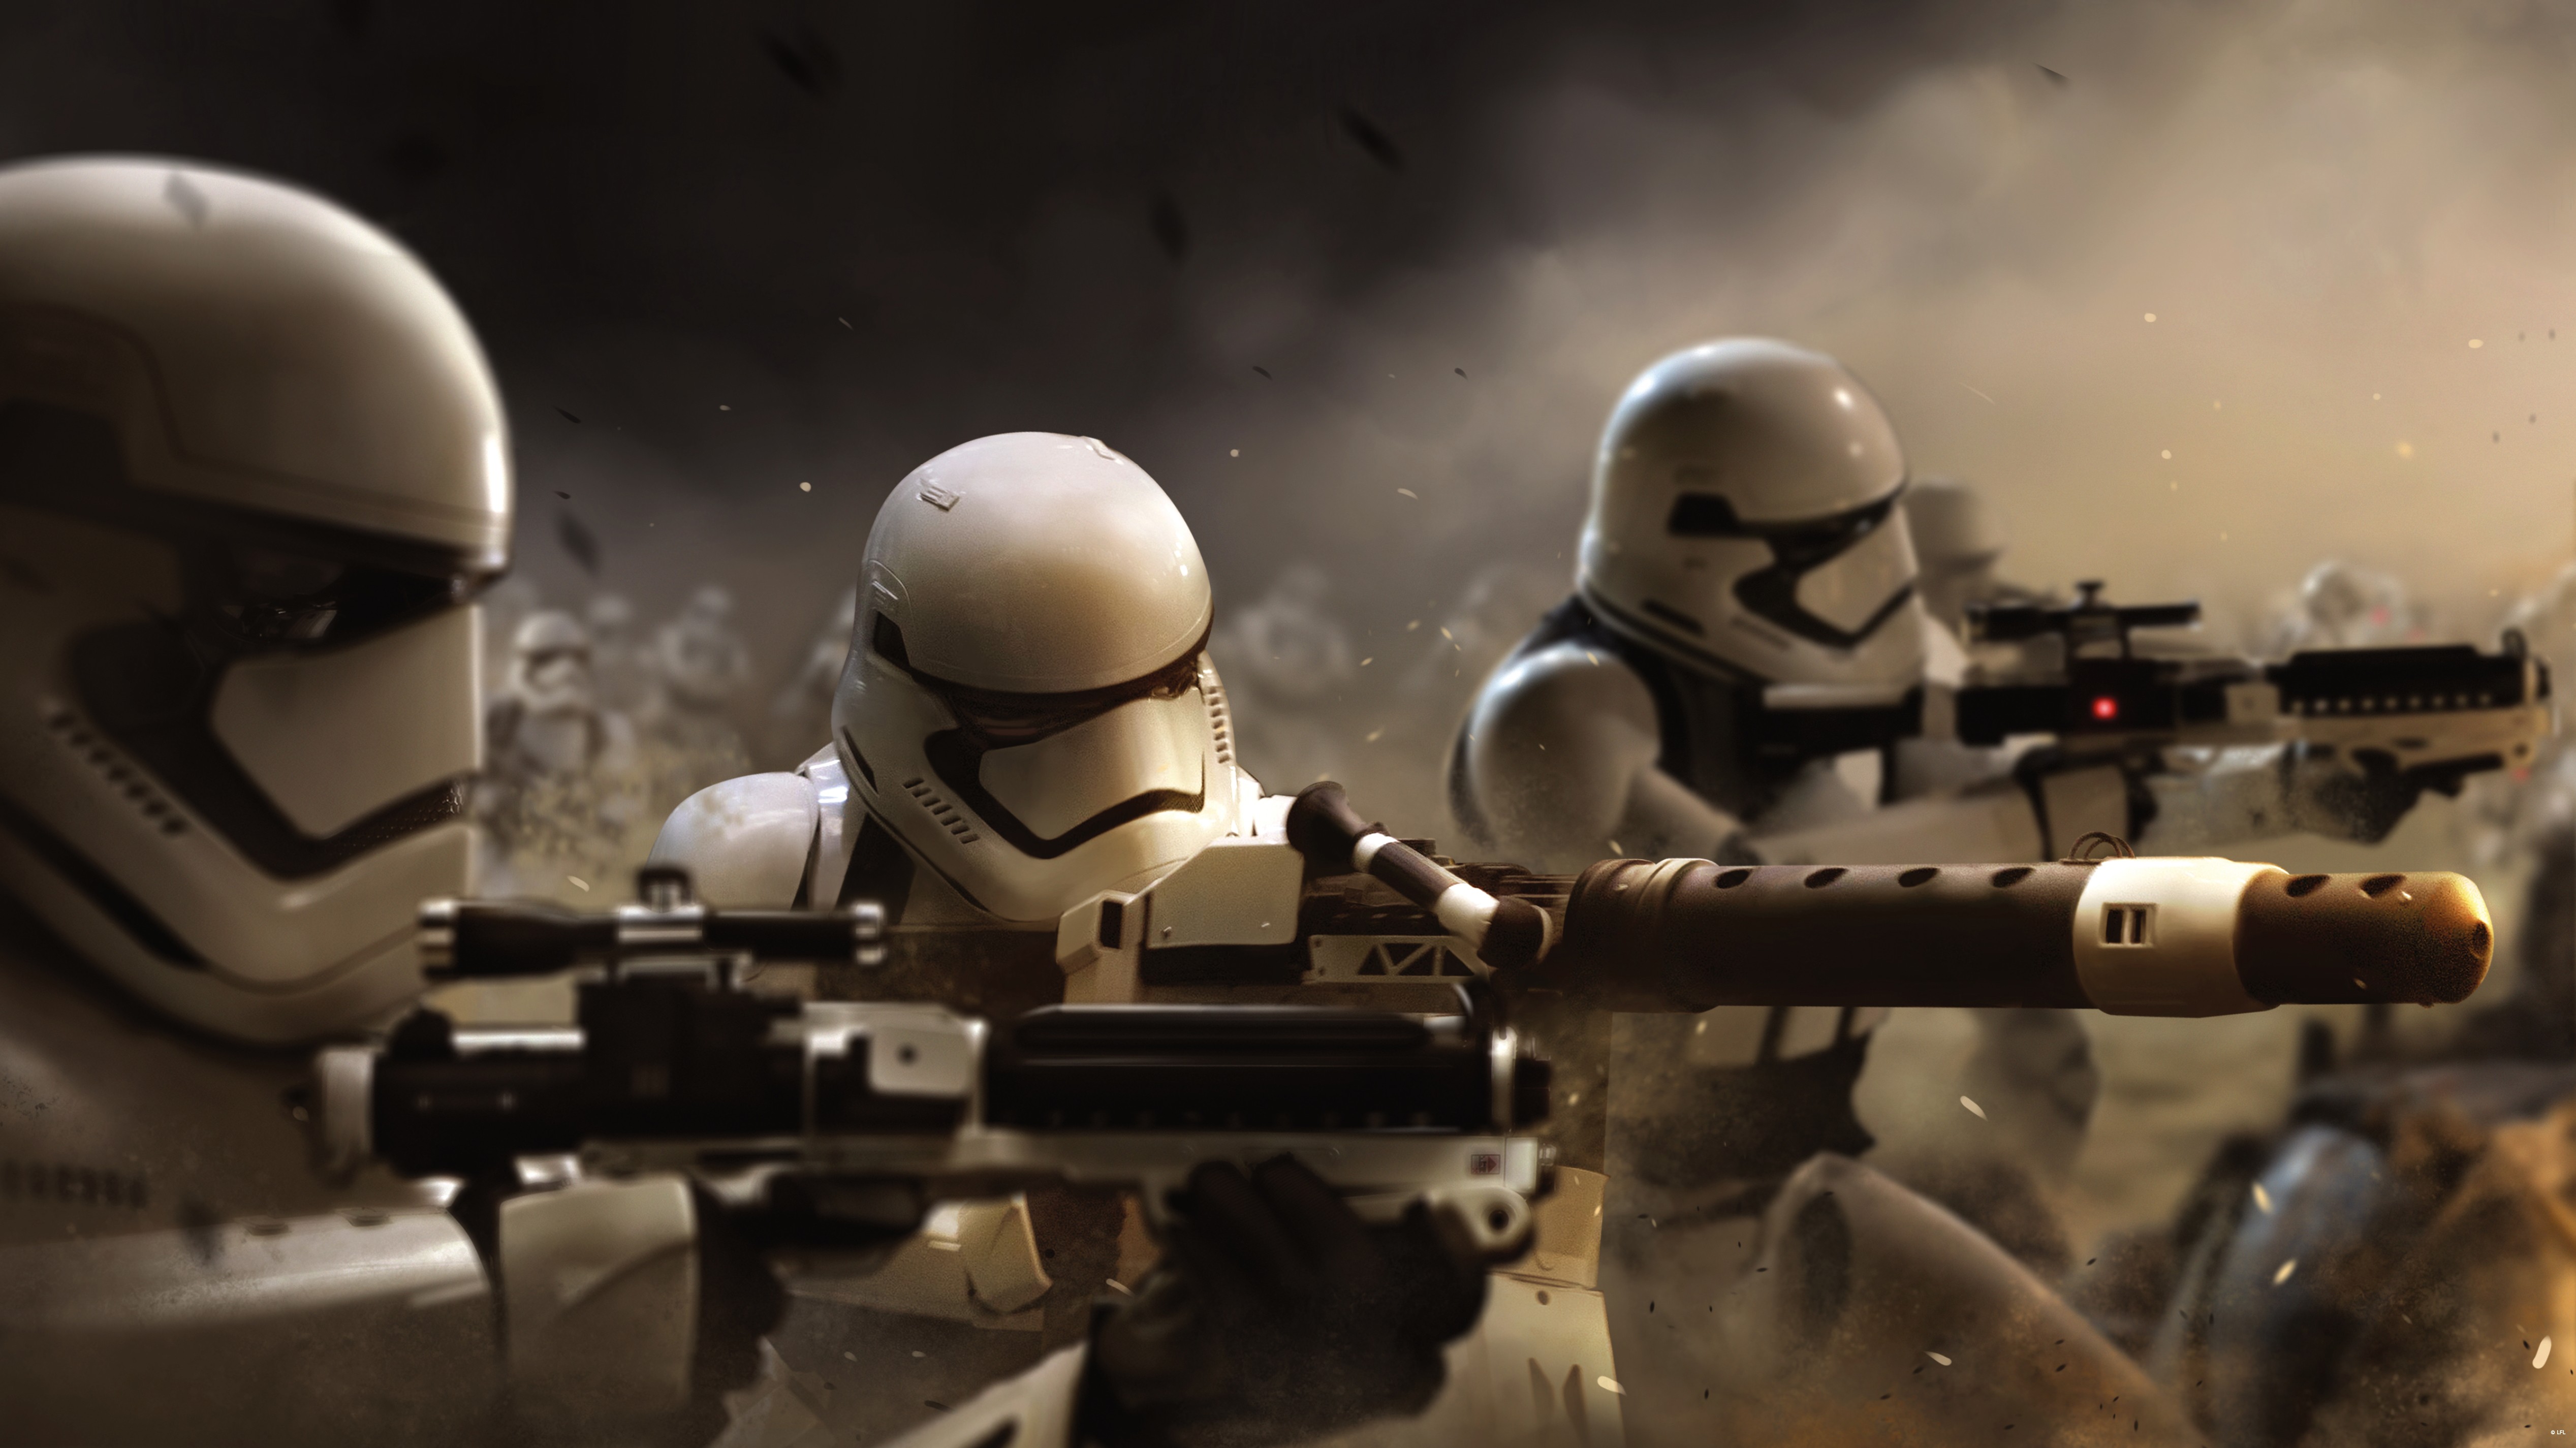 General 5070x2850 Star Wars Star Wars: The Force Awakens movies The First Order First Order Trooper science fiction blaster Futuristic Weapons